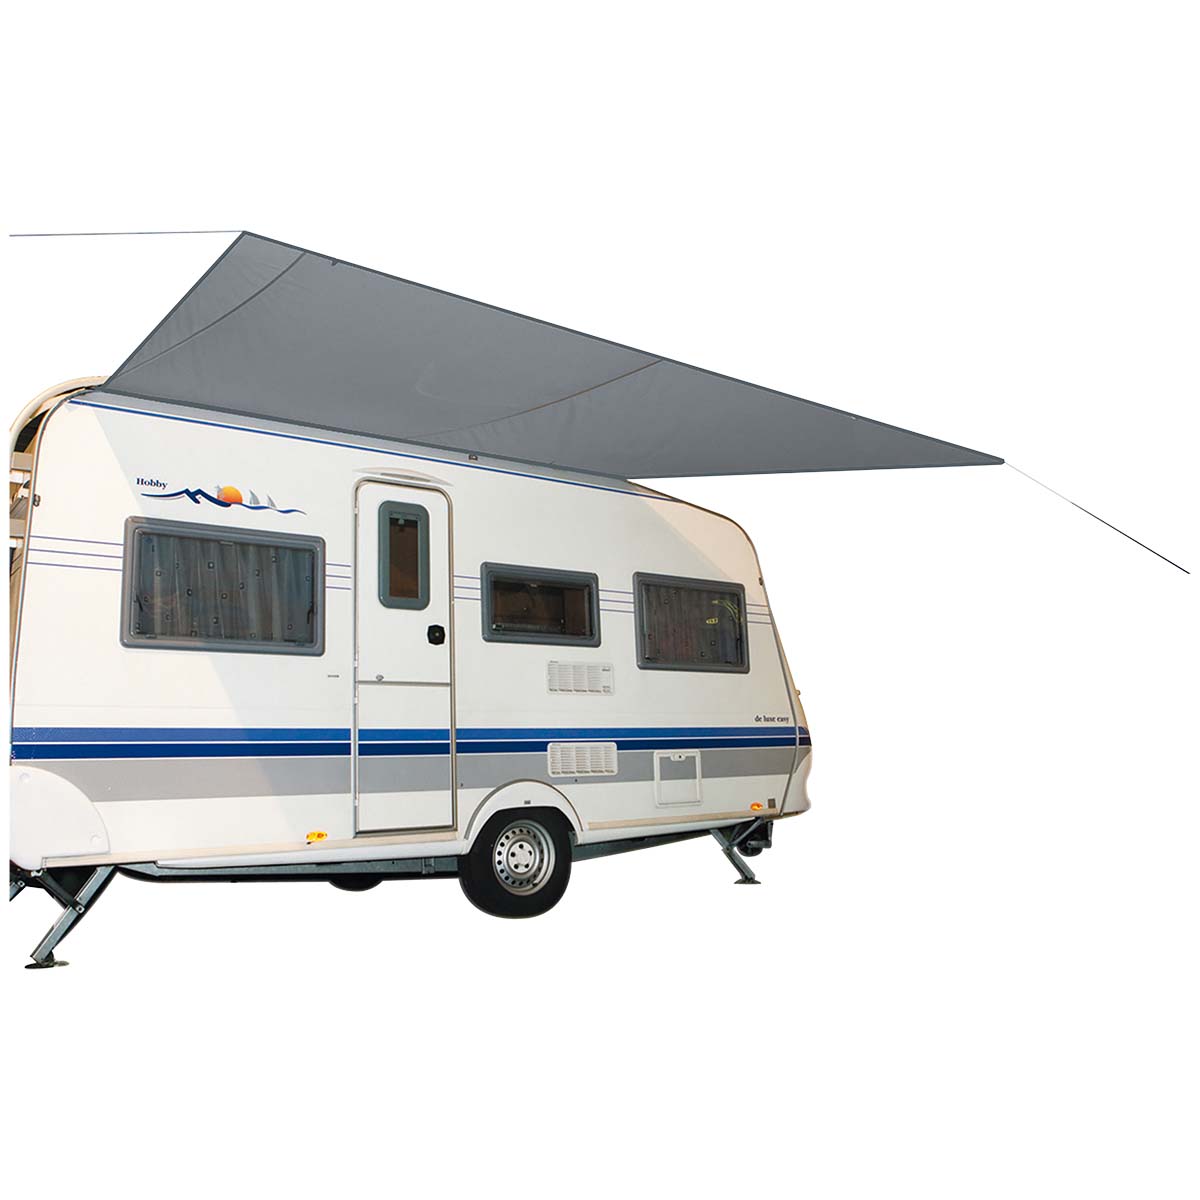 4471550 A tarpaulin with an extra strong strip for the caravan rails. This tarpaulin is quick and easy to attach to the trailer and can also be attached to the caravan/camper, rolled up. This tarpaulin can also be set-up loose by means of the eyelets in the tarpauling and the provided guy ropes and pegs. Is waterproof due to the PU coating and a 2000 mm water column. Including a handy carry bag.